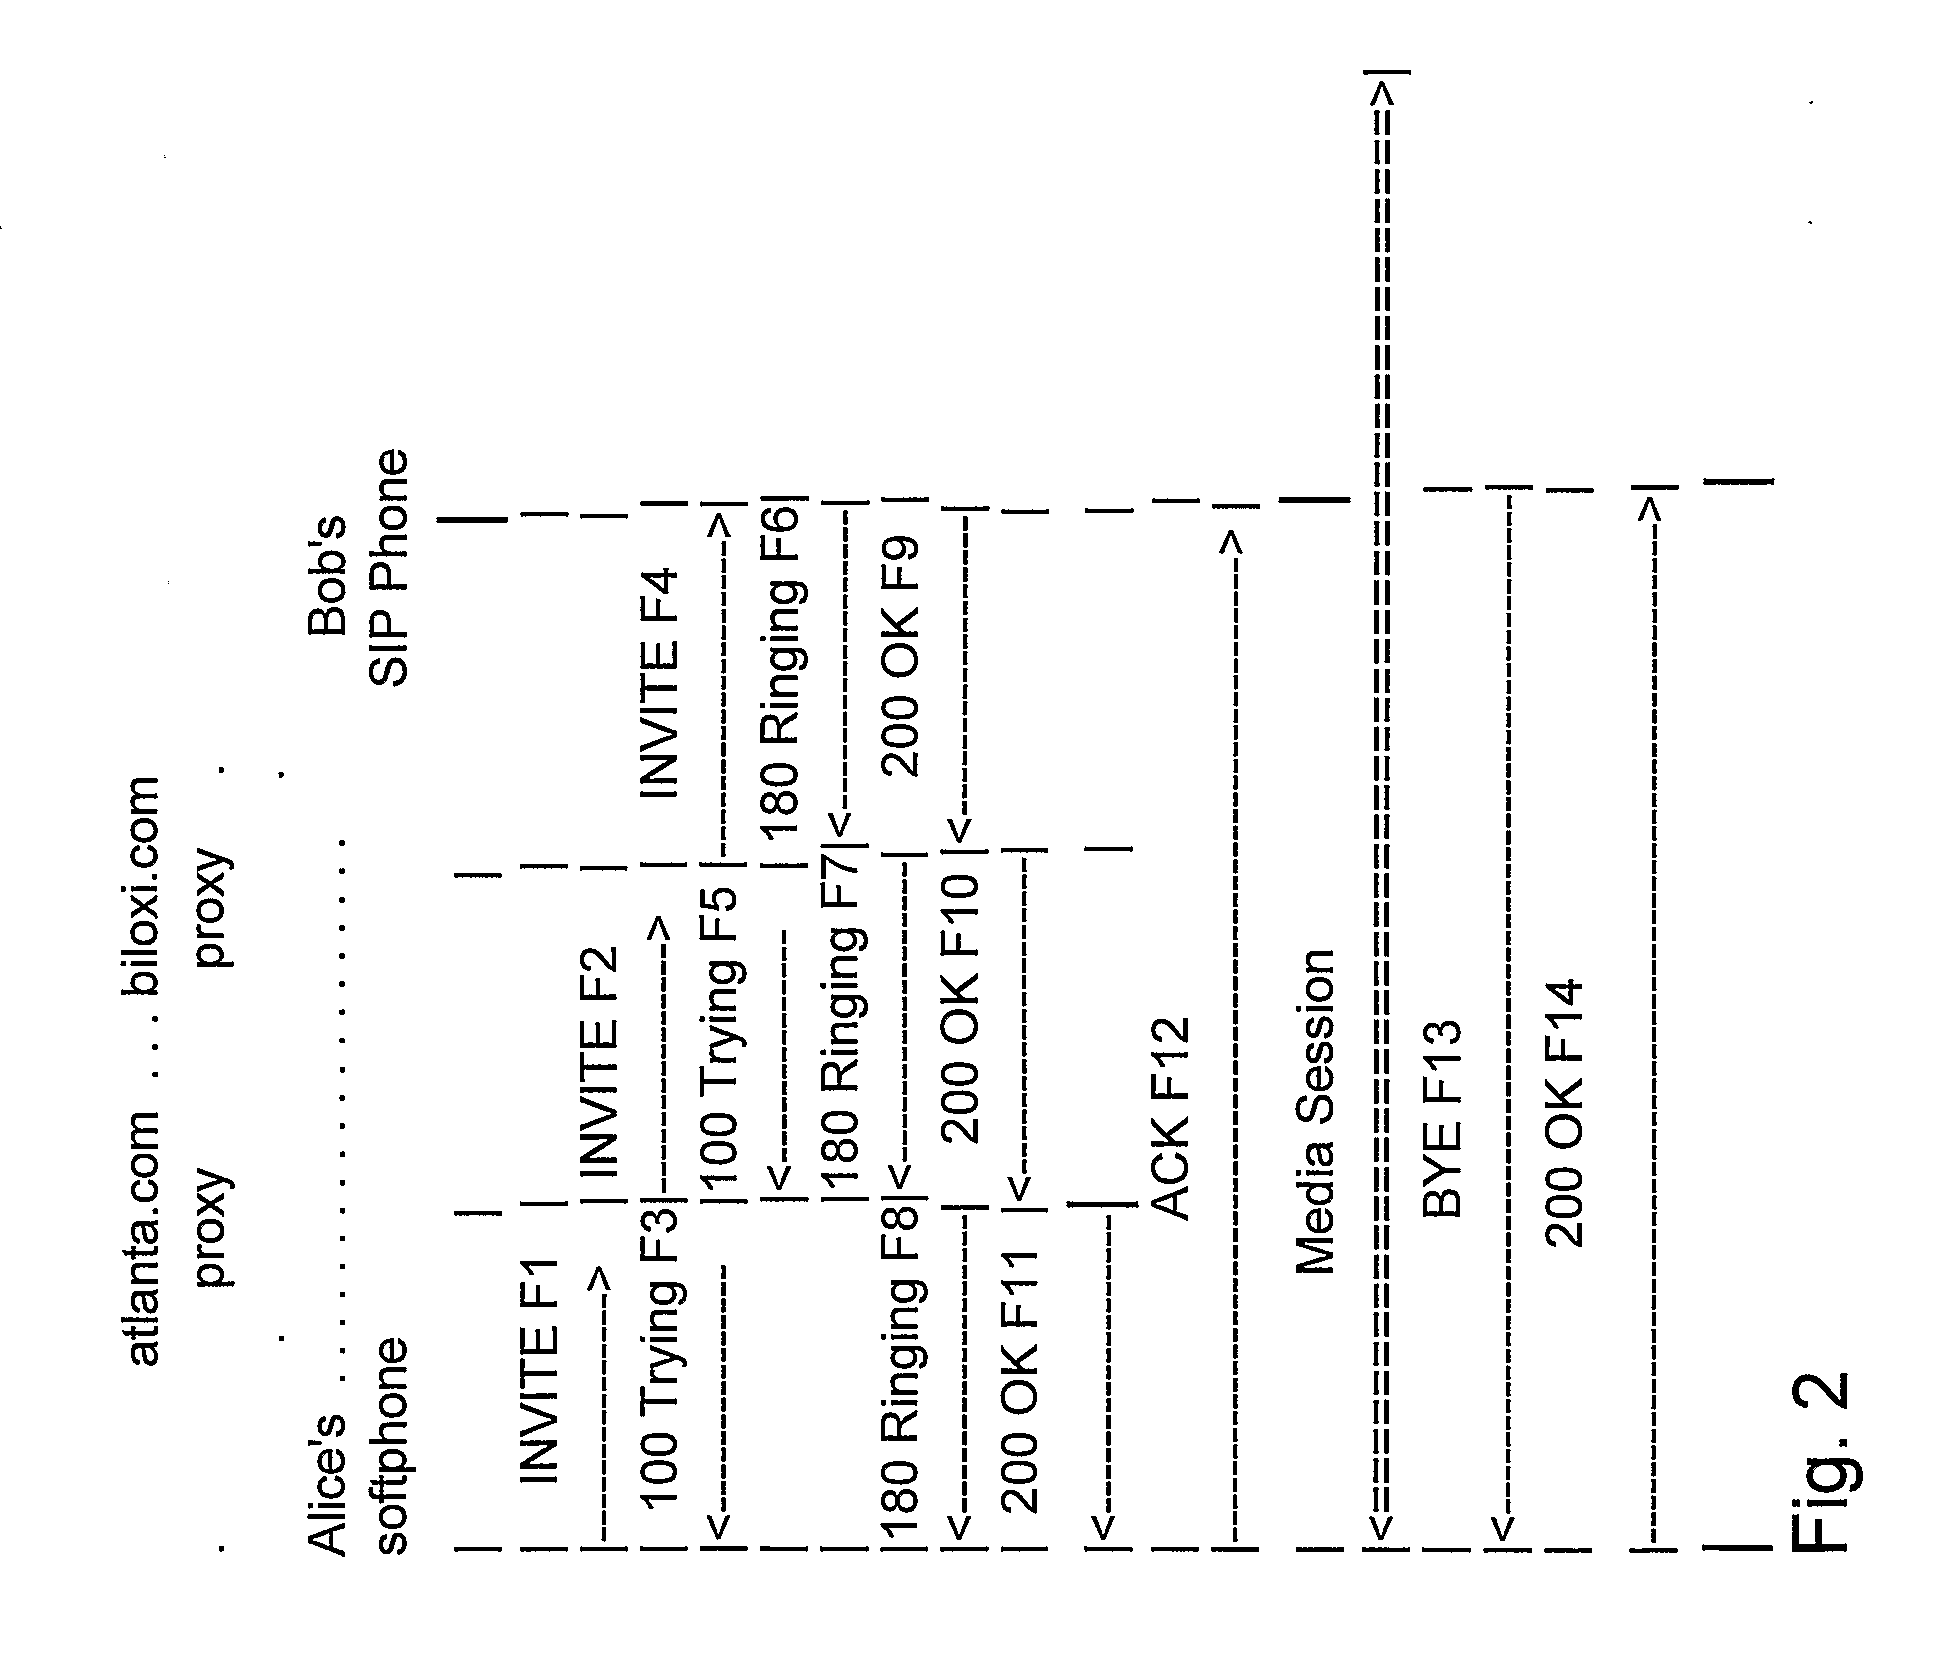 Method For Distributing New Services in an Internet Multimedia Subsystem (Ims), and a Node Adapted Therefore